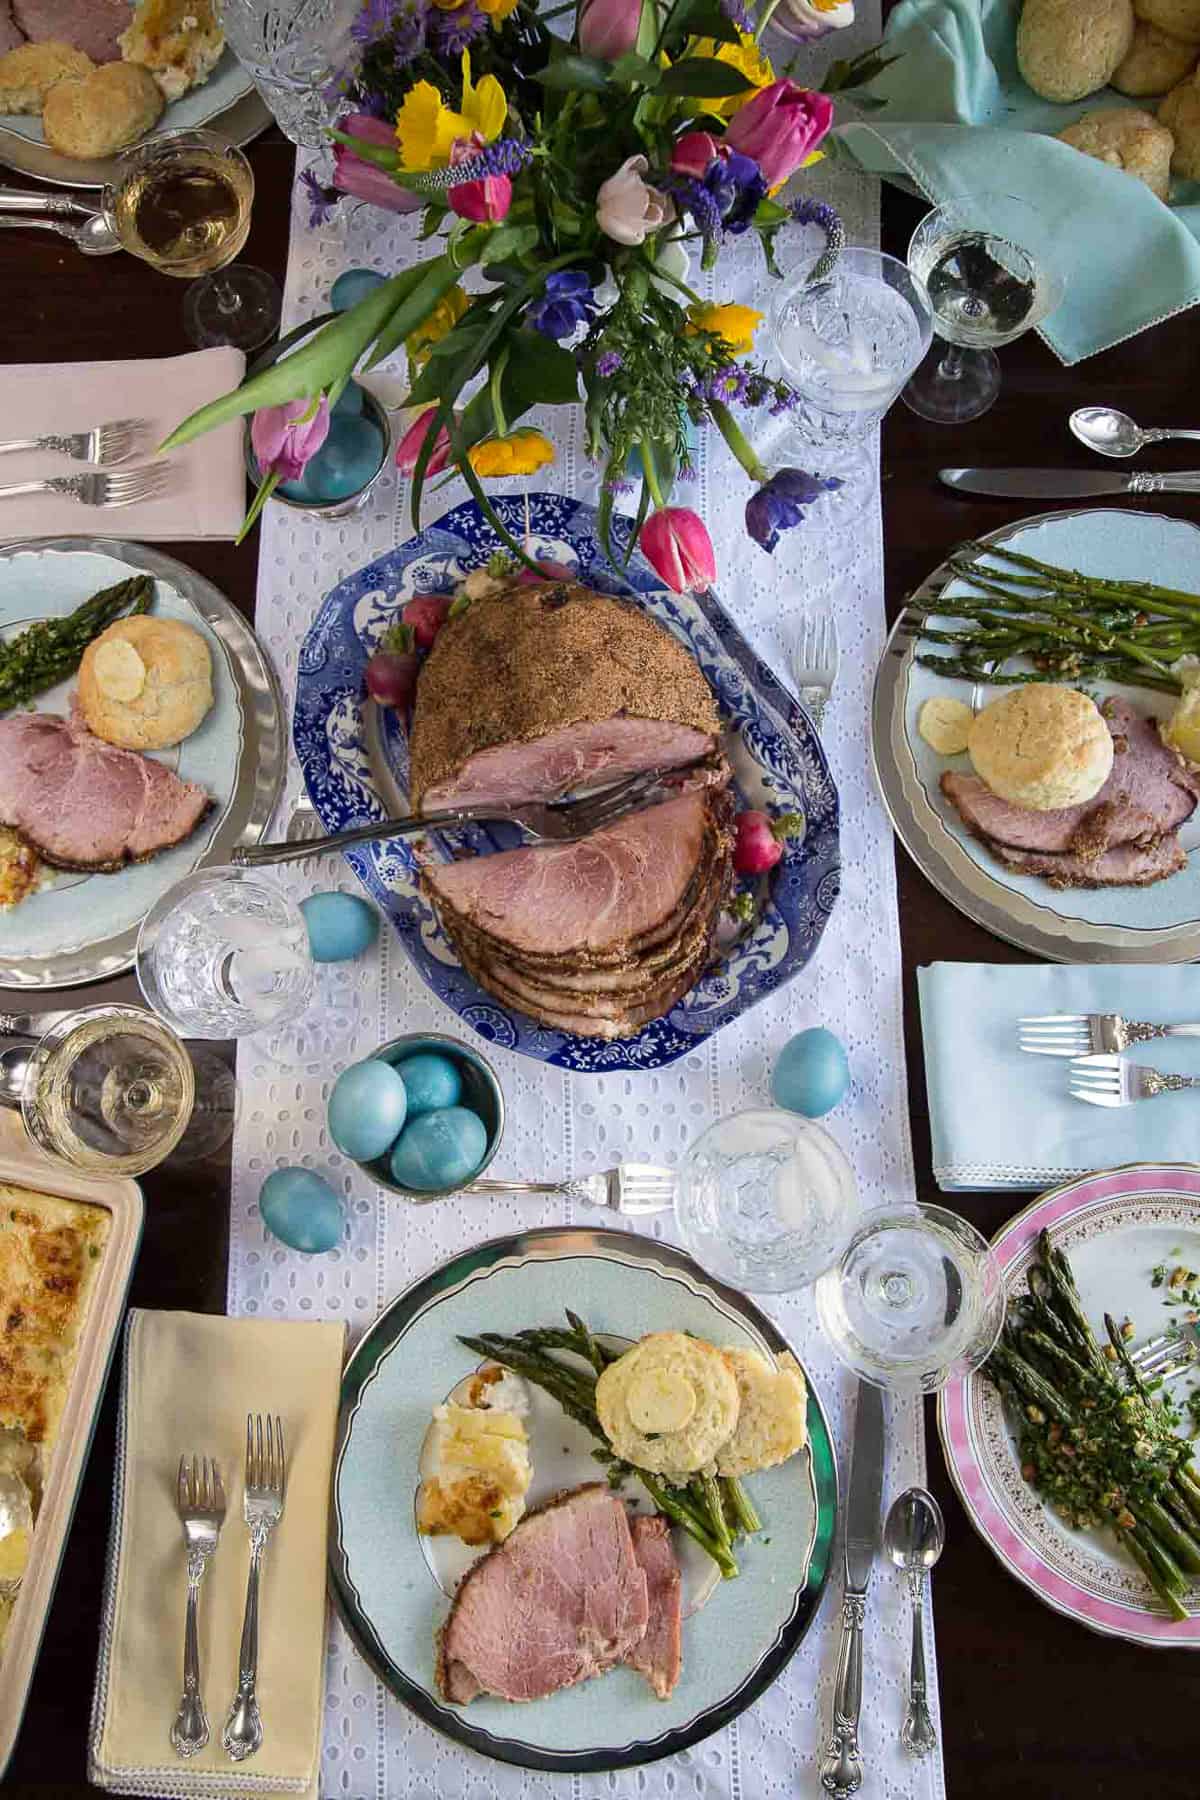 table set for easter dinner with a ham and sides.